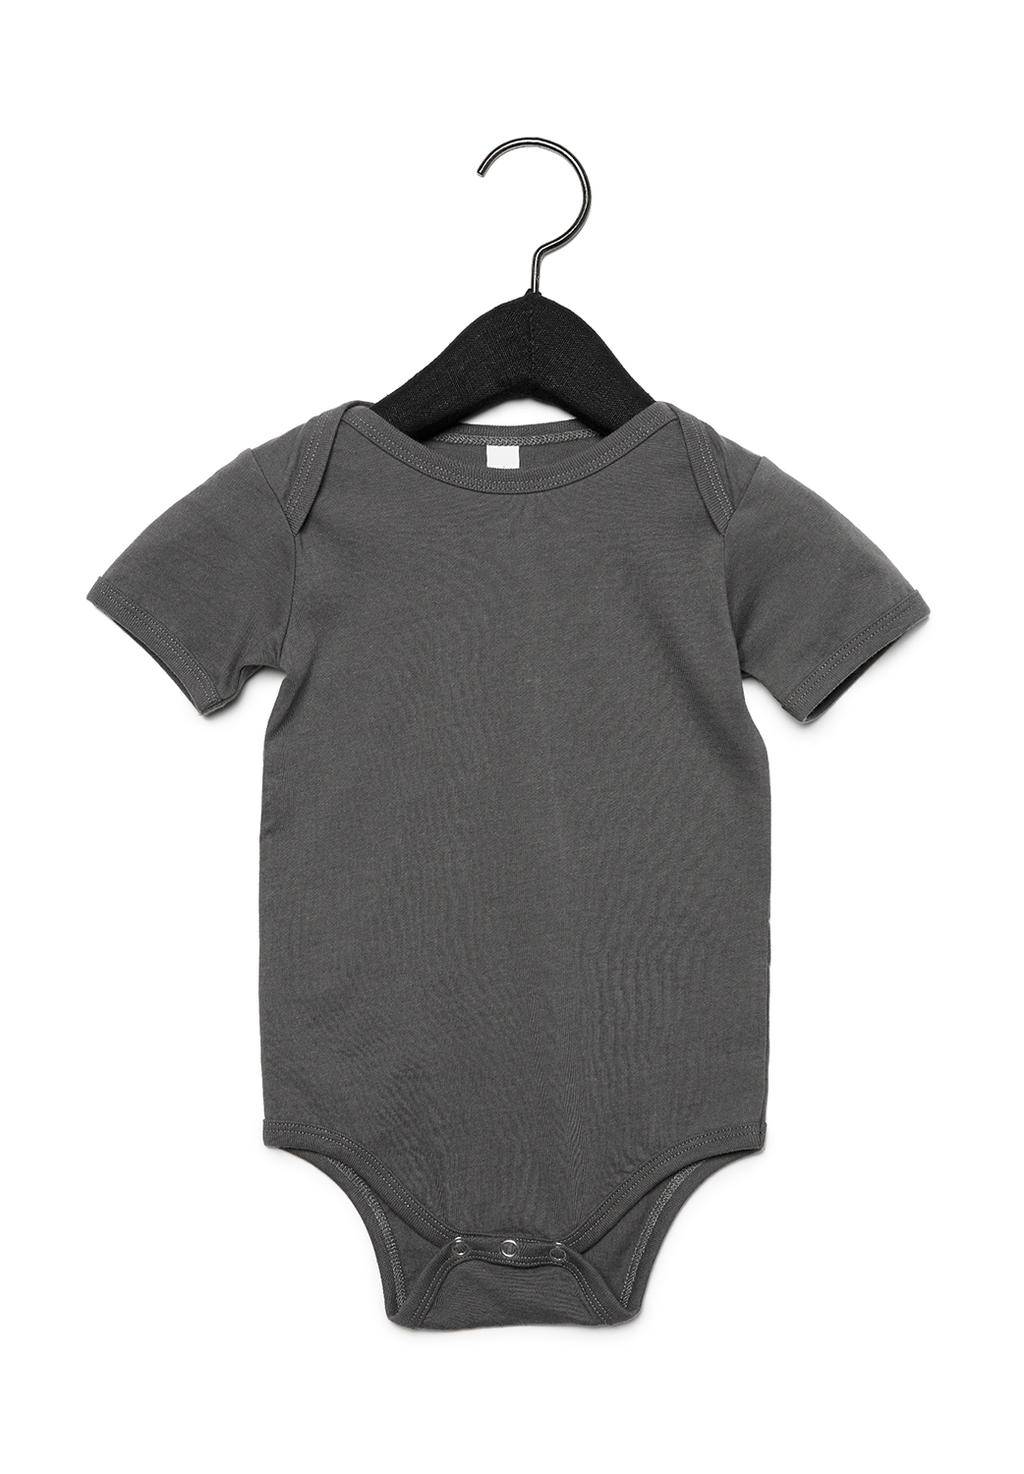  Baby Jersey Short Sleeve One Piece in Farbe Asphalt